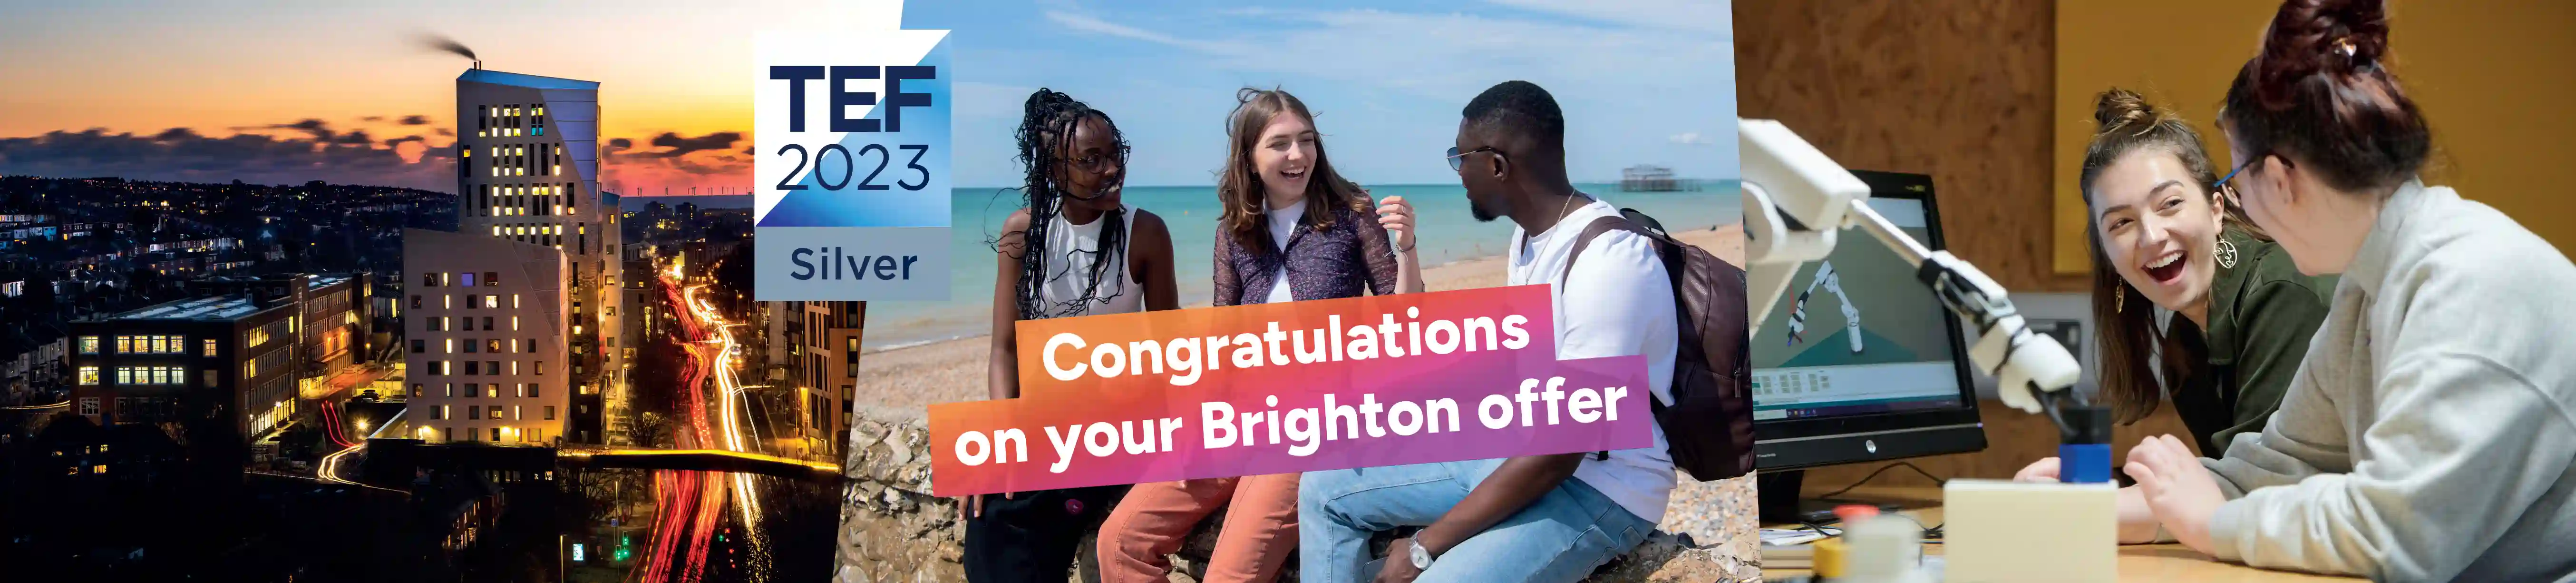 Composite image of Moulsecoomb campus and students, with the text 'Congratulations on your Brighton offer' and a TEF Silver Award logo